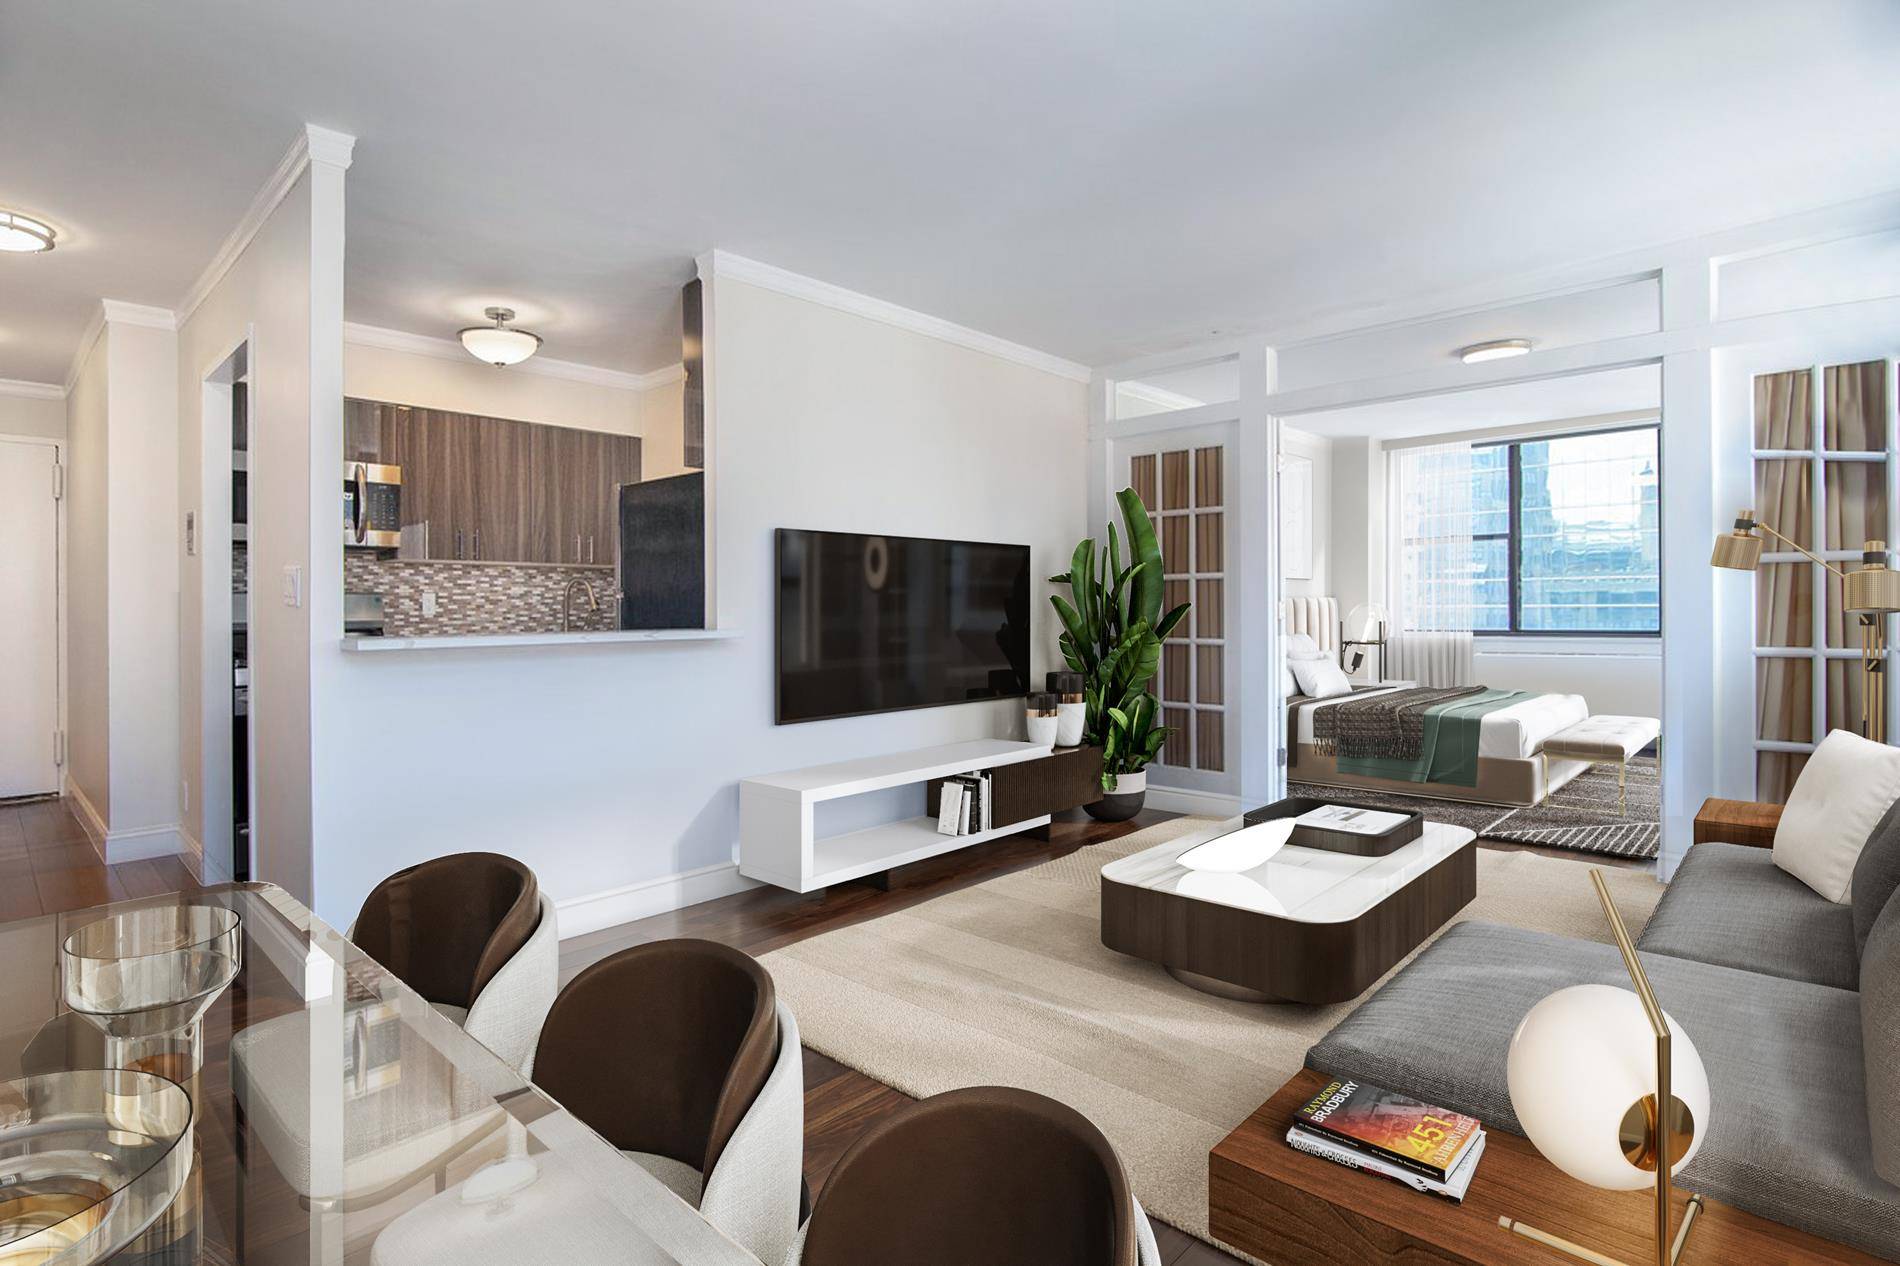 This newly renovated 2 bedroom amp ; 1 bathroom PENTHOUSE condo at 'The Delegate' boasts open South West exposures with STUNNING views of Midtown Manhattan including the iconic Chrysler Building.